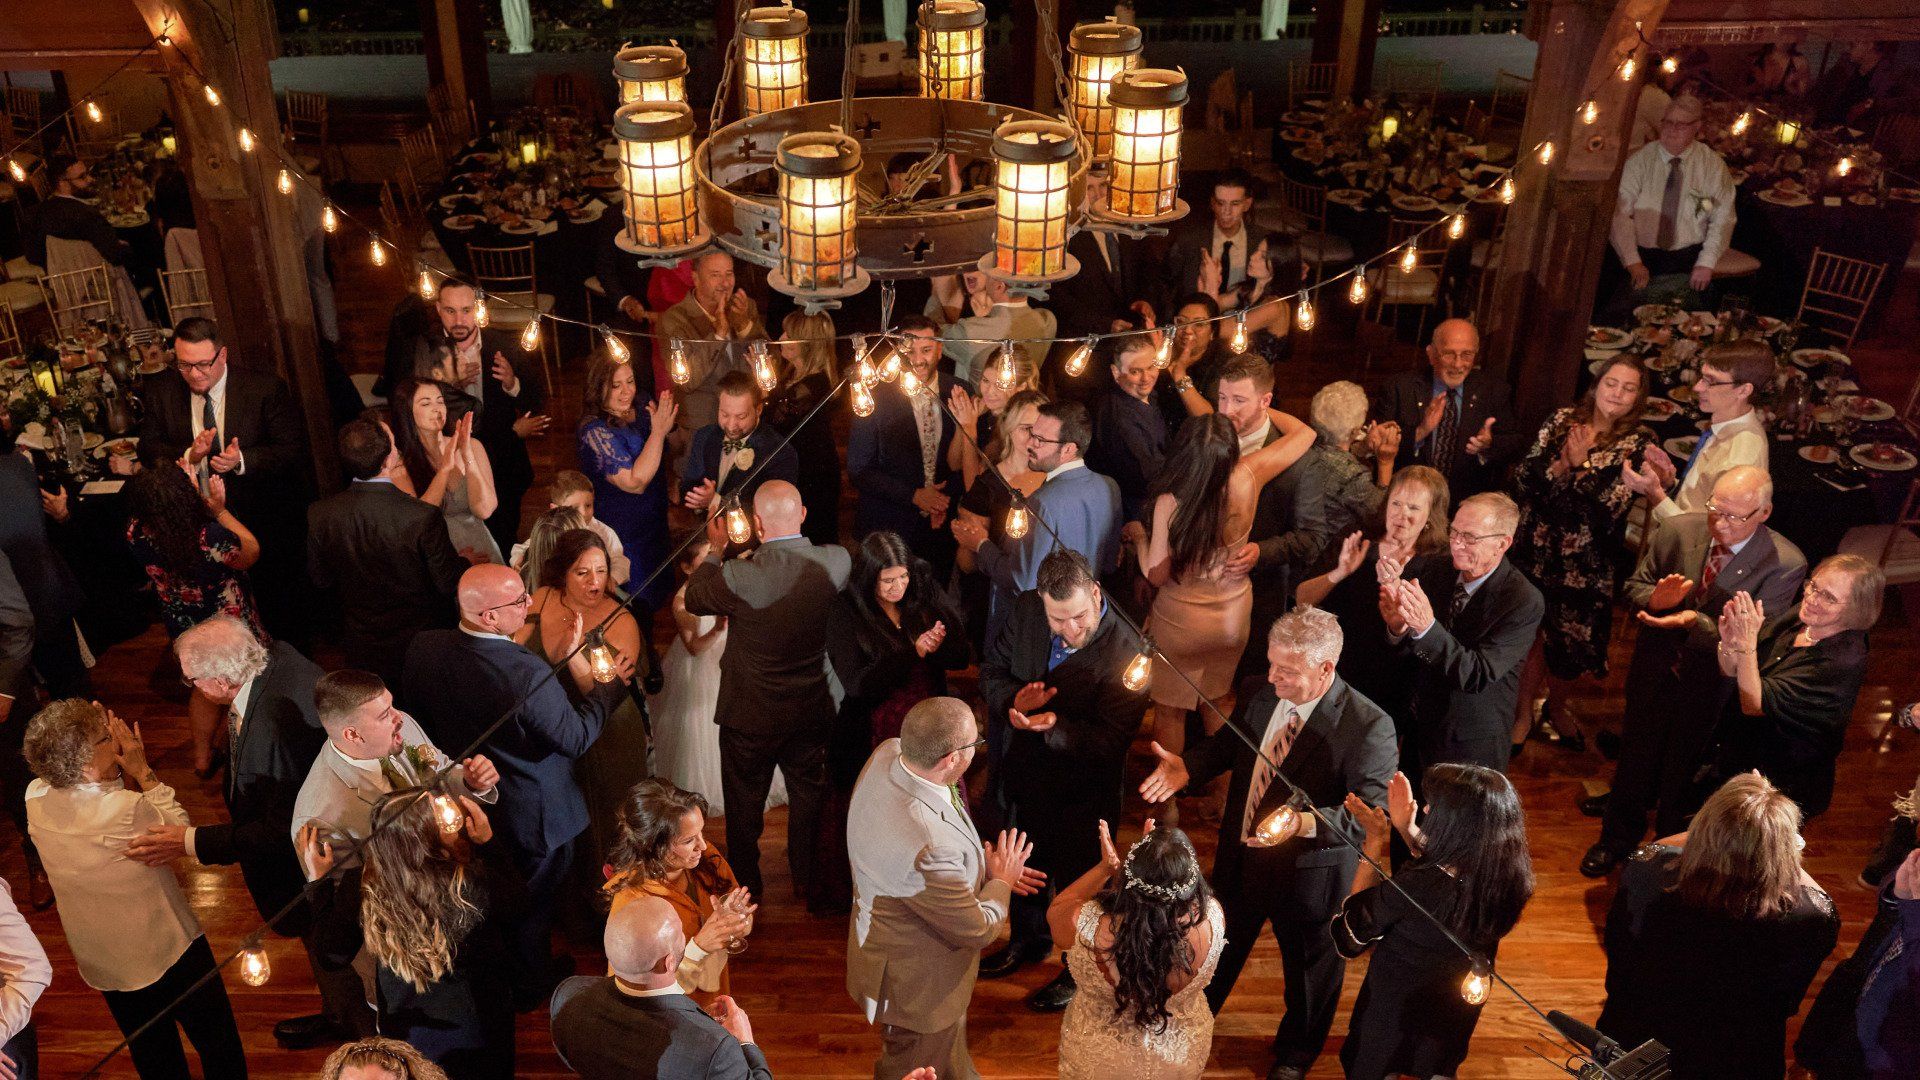 A large group of people are dancing at a wedding reception.